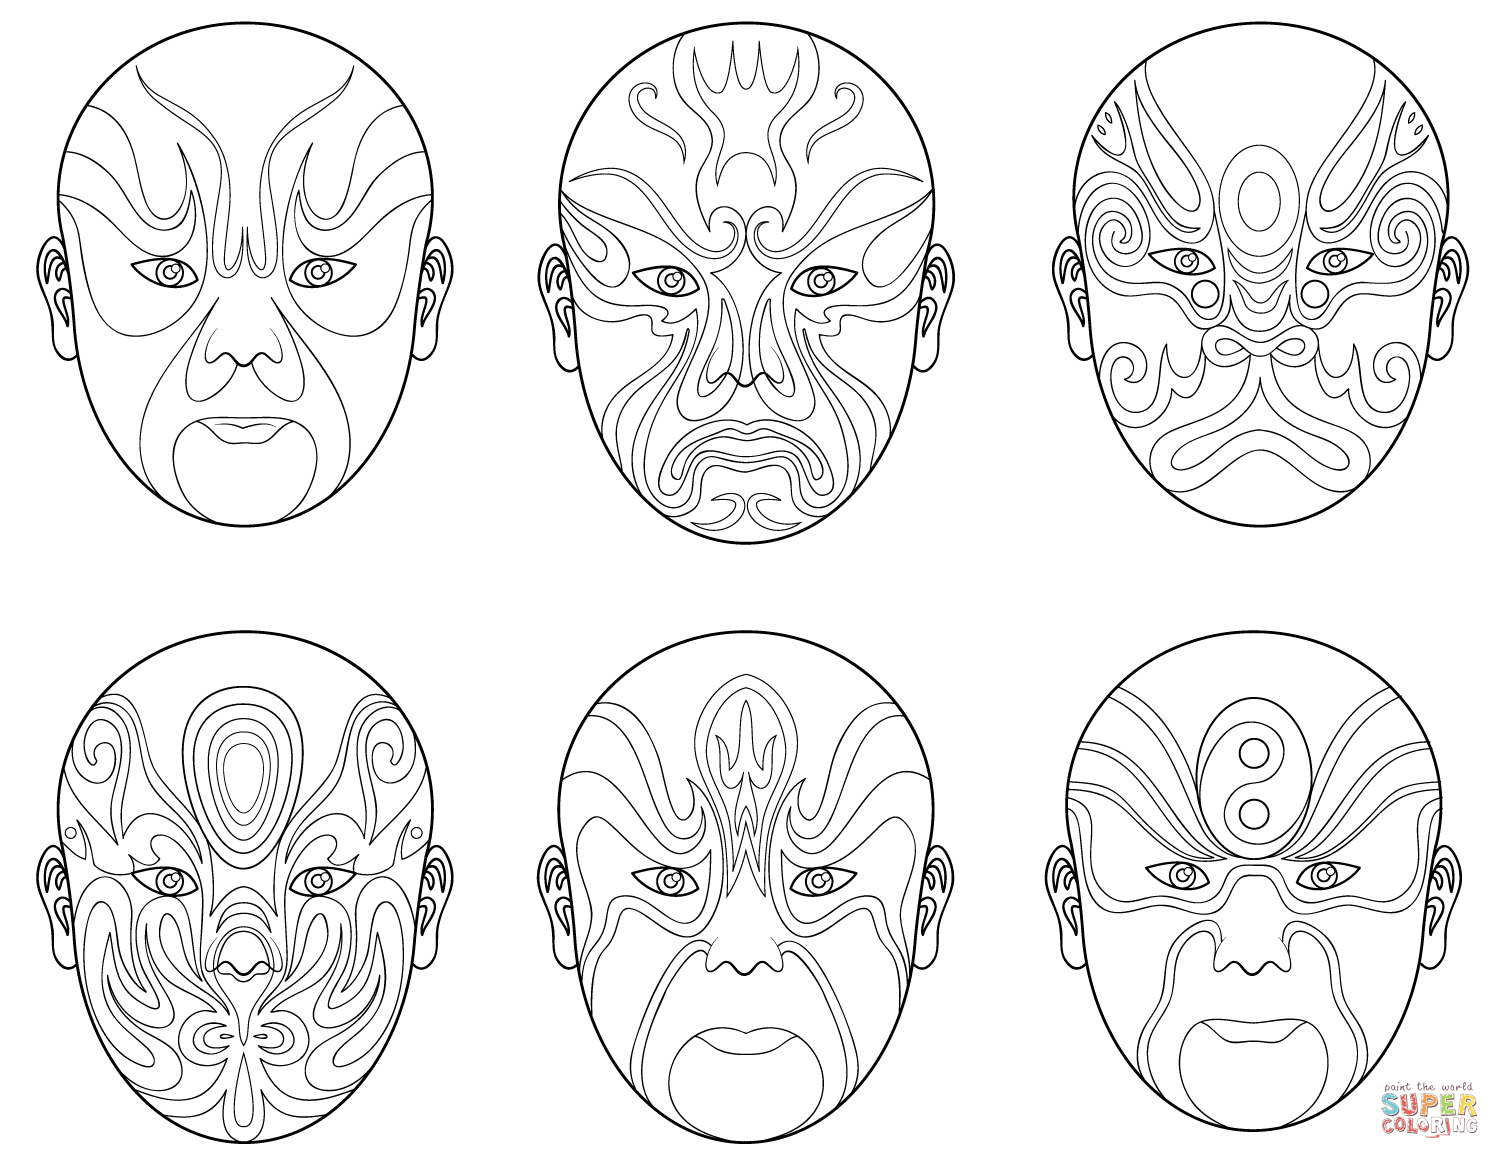 Chinese opera masks coloring page free printable coloring pages